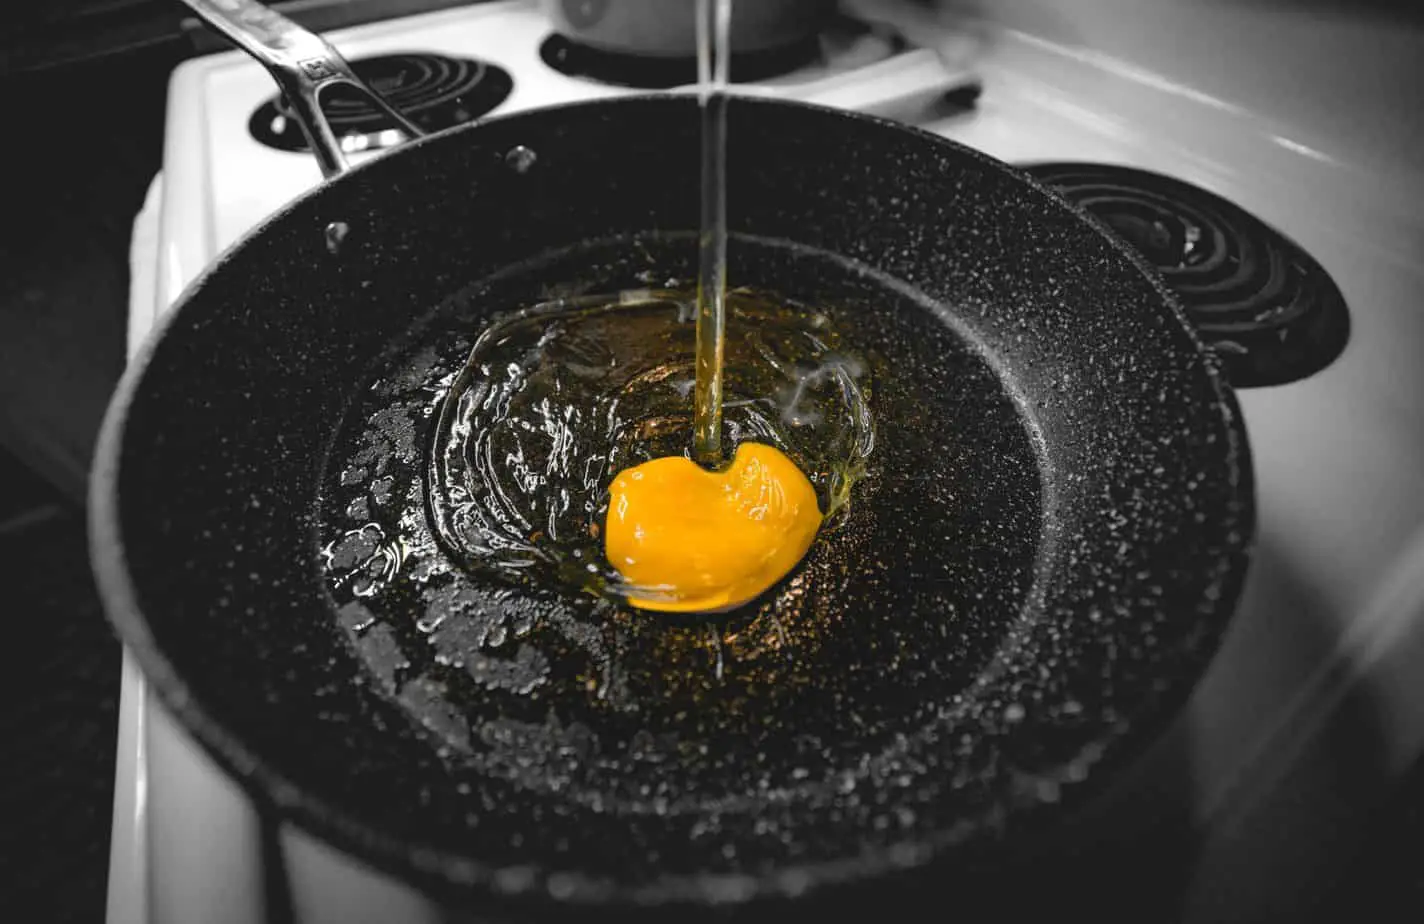 Fried egg perfectly cooking